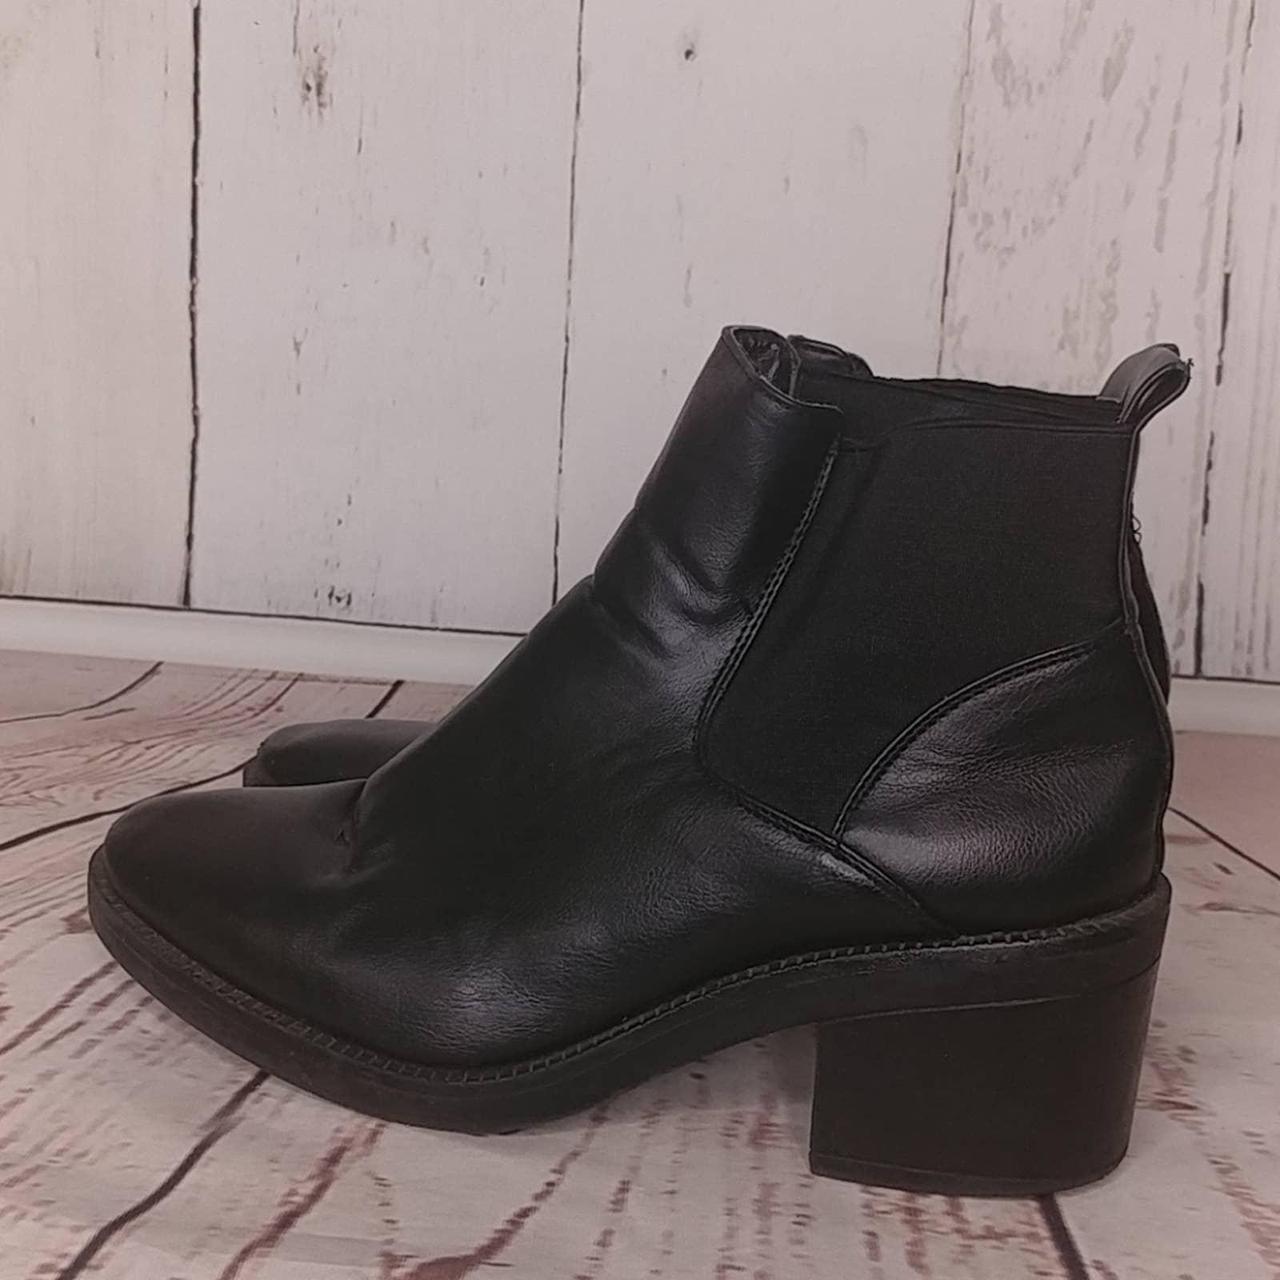 Black New Look ankle boots with elastic inserts at... - Depop